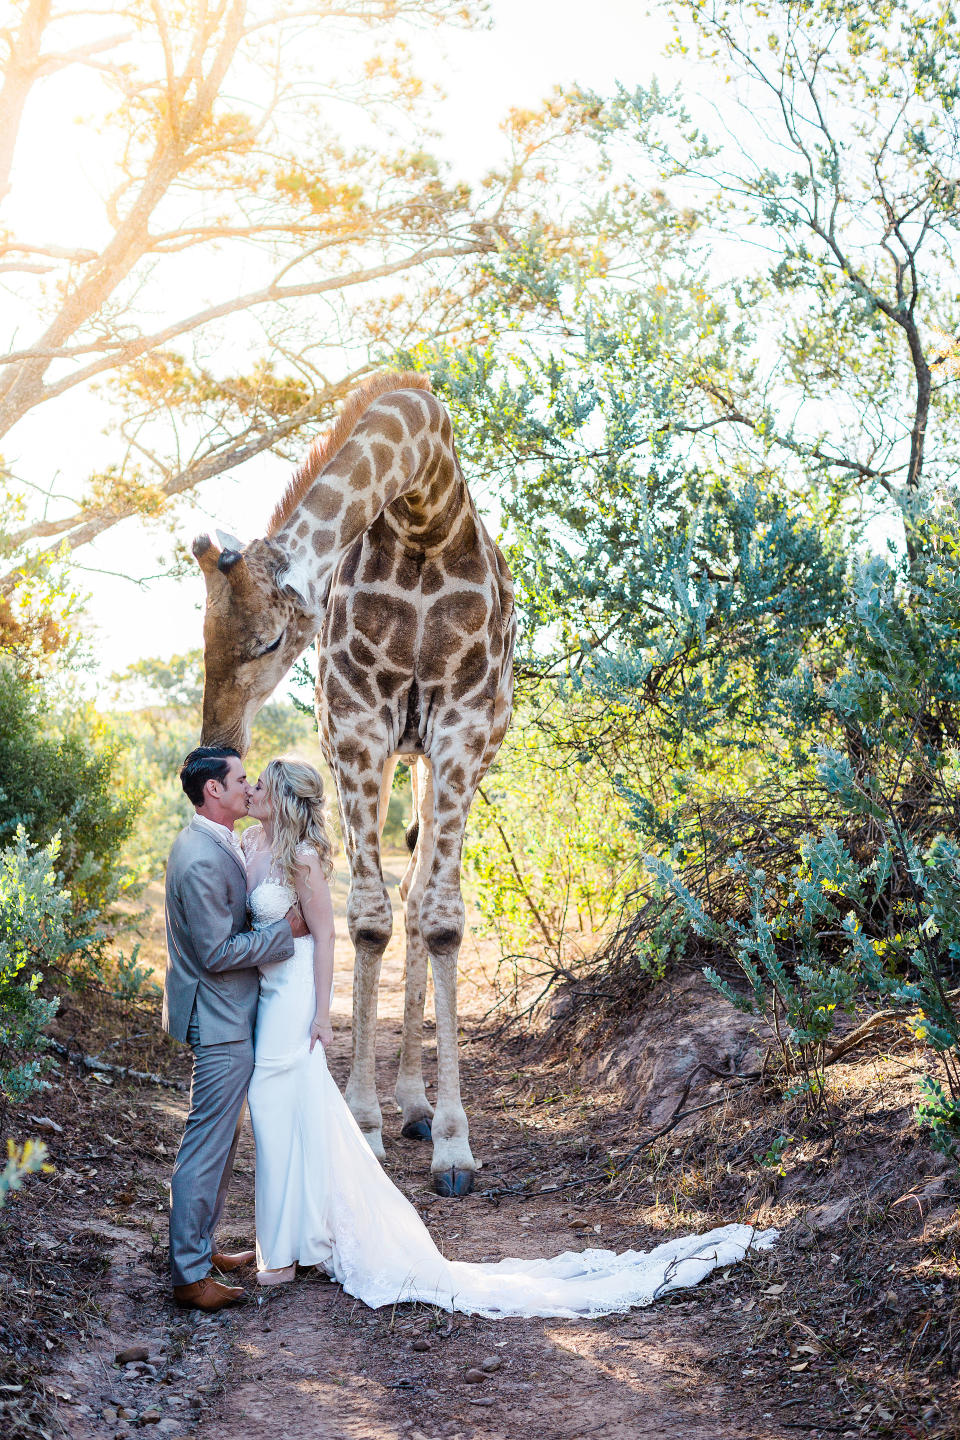 Just a little congratulatory nuzzle for the happy couple. (Photo: <a href="https://www.stephanienormanphotography.com/" target="_blank">Stephanie Norman Photography</a>)